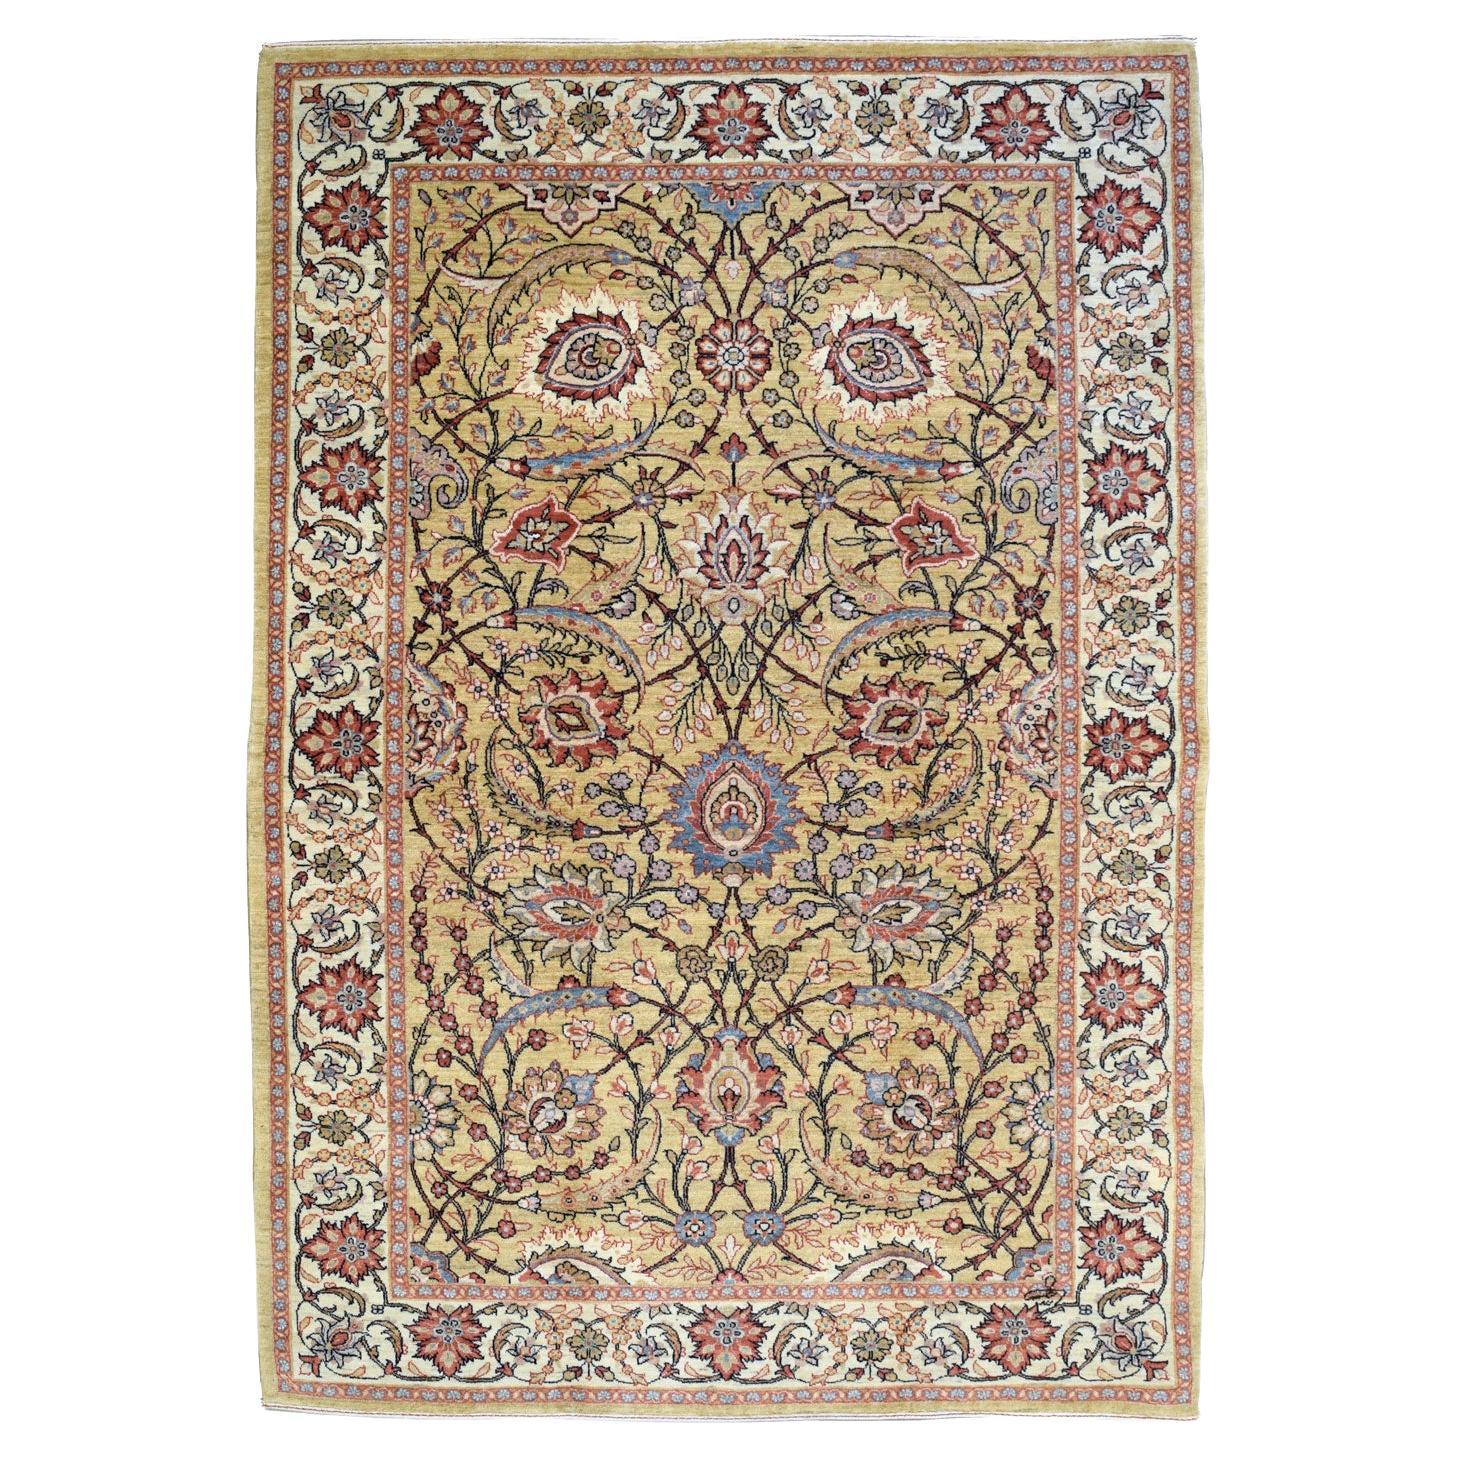 Pure Wool Mohtasham Persian Carpet, Cream, Red, and Blue, 5' x 7'